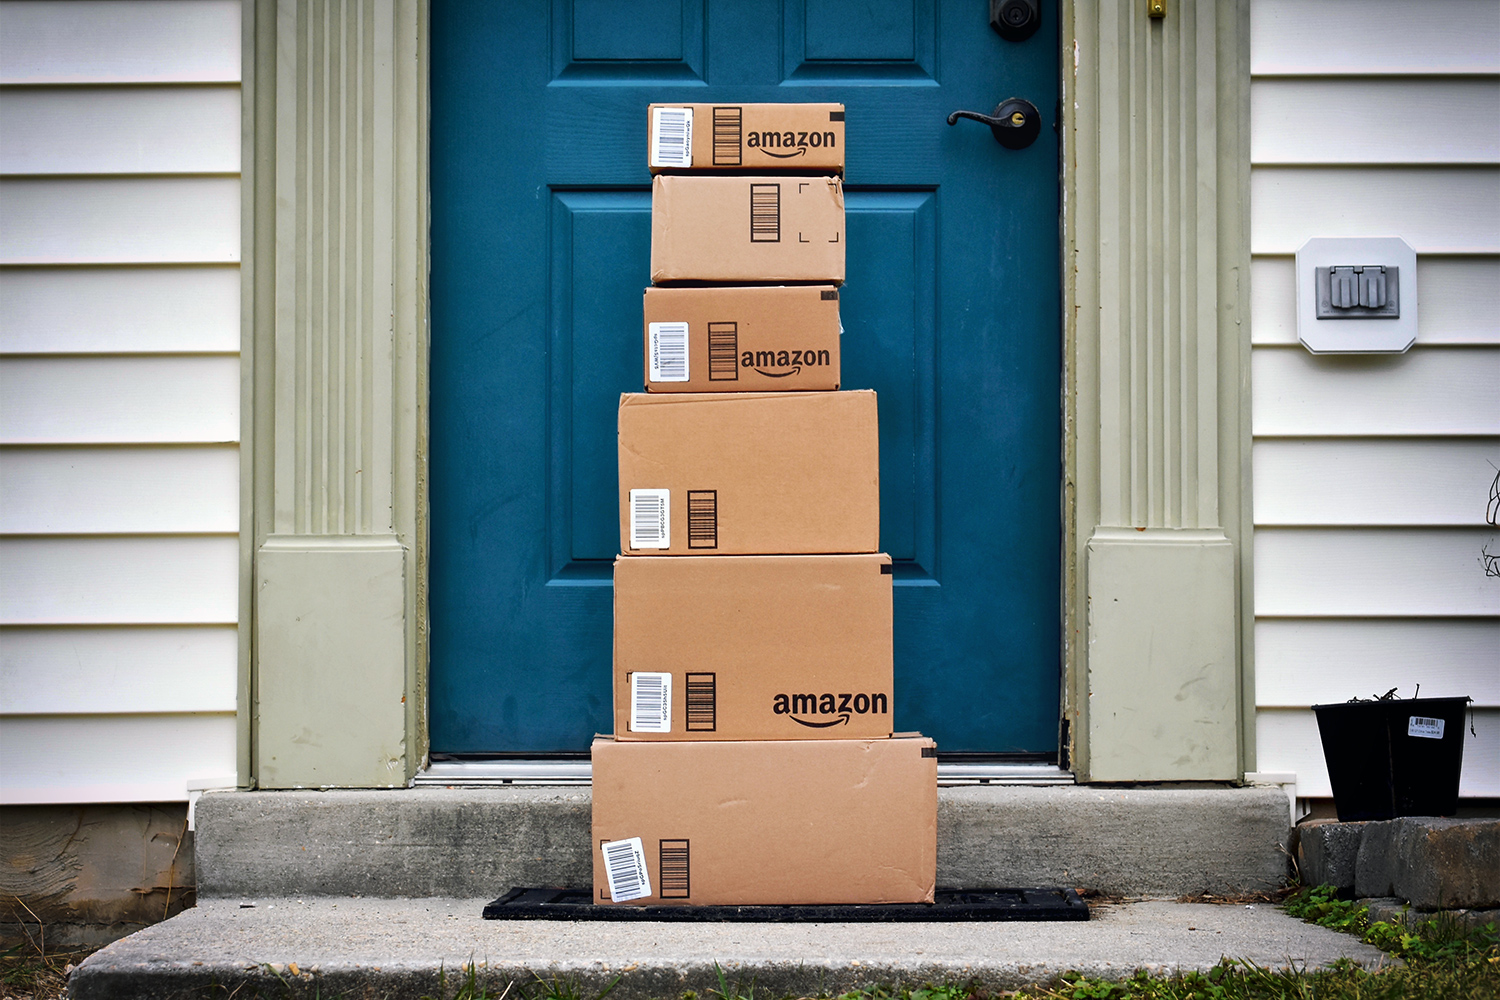 Amazon is photographing deliveries to show where they've been left